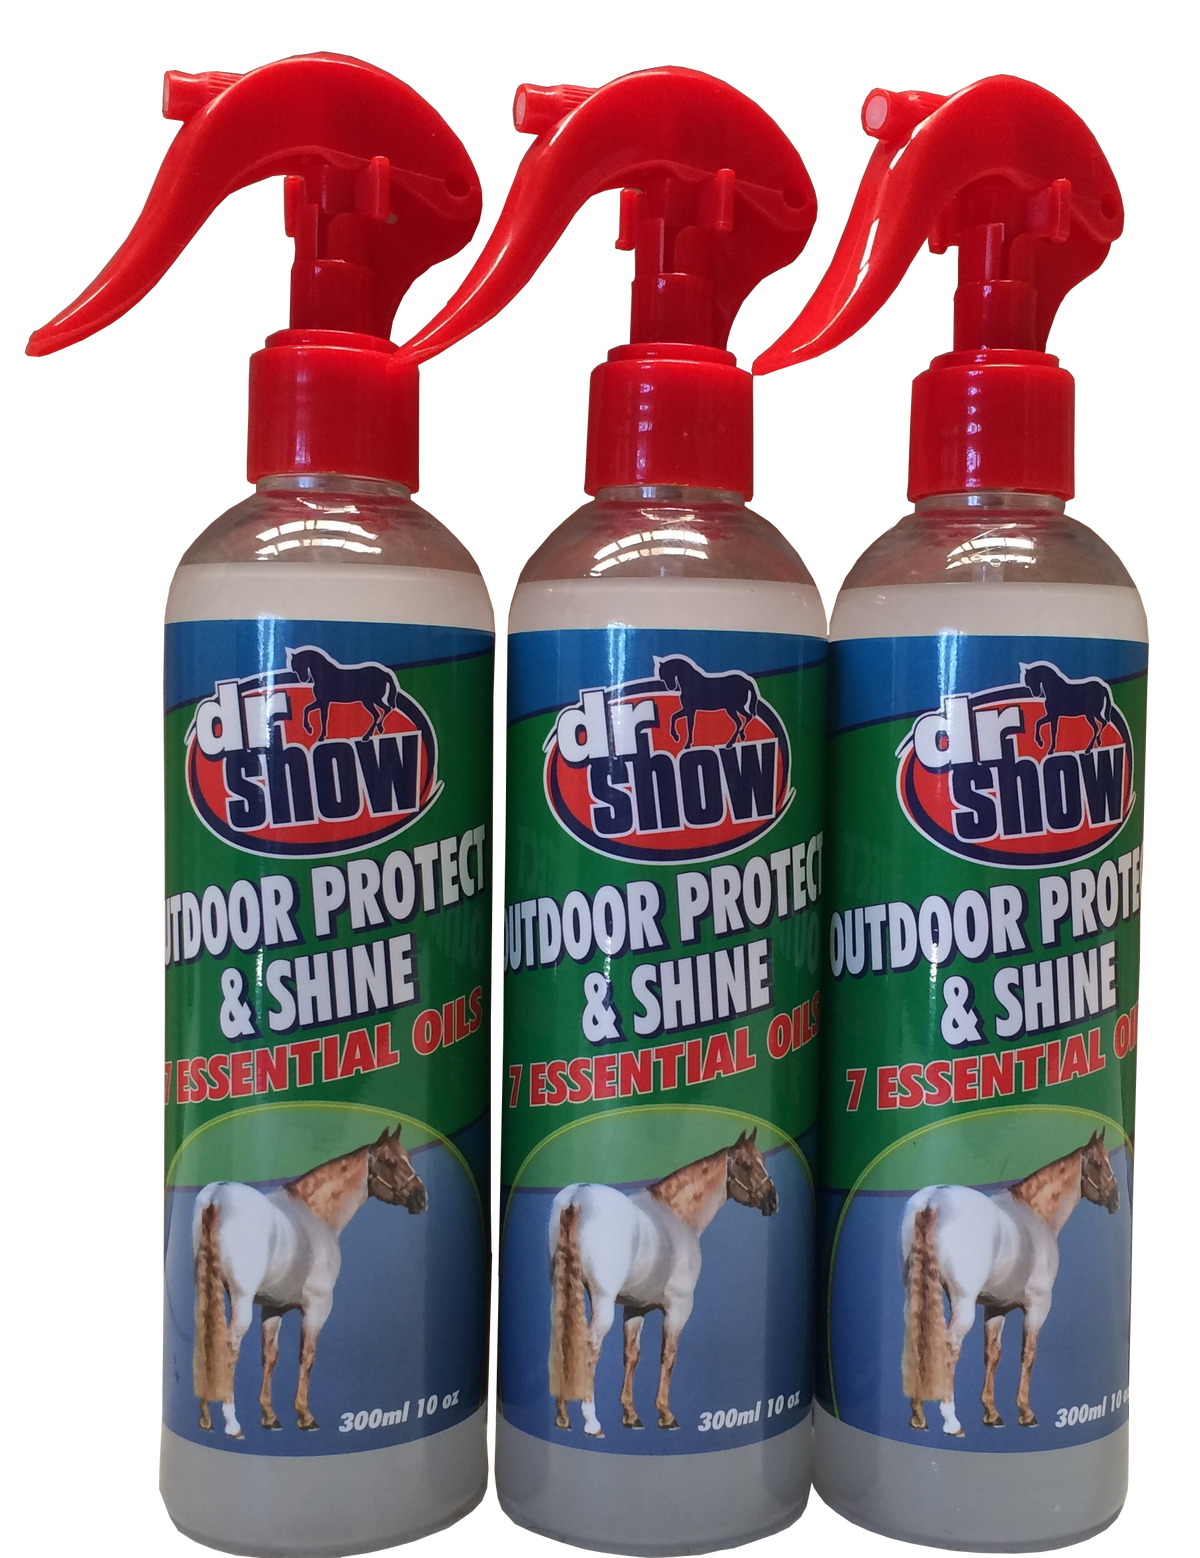 Dr Show Outdoor Protect N Shine